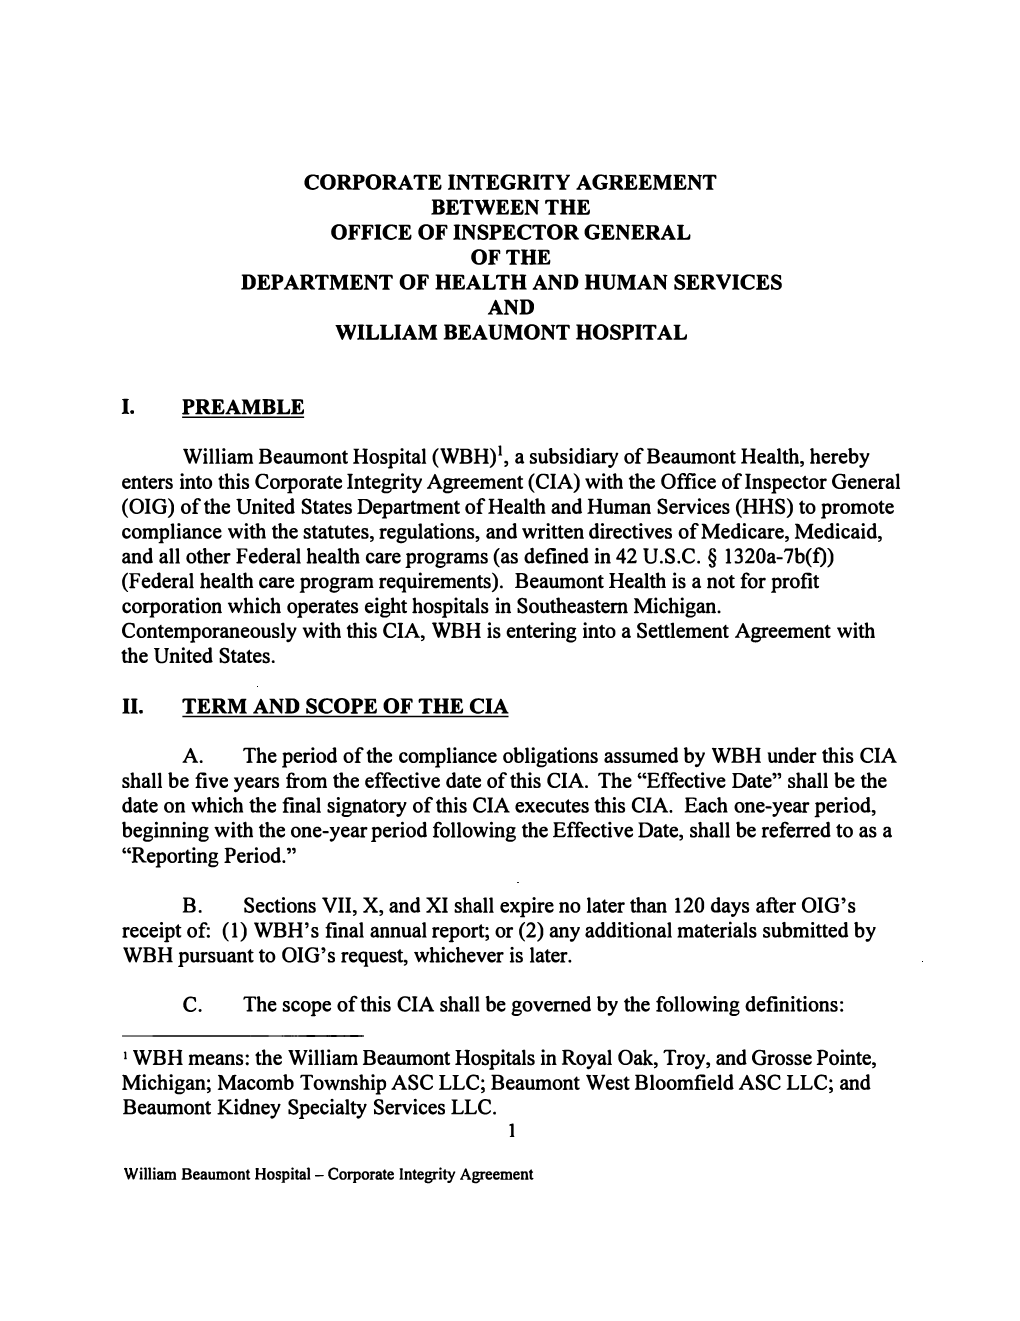 William Beaumont Hospital Corporate Integrity Agreement